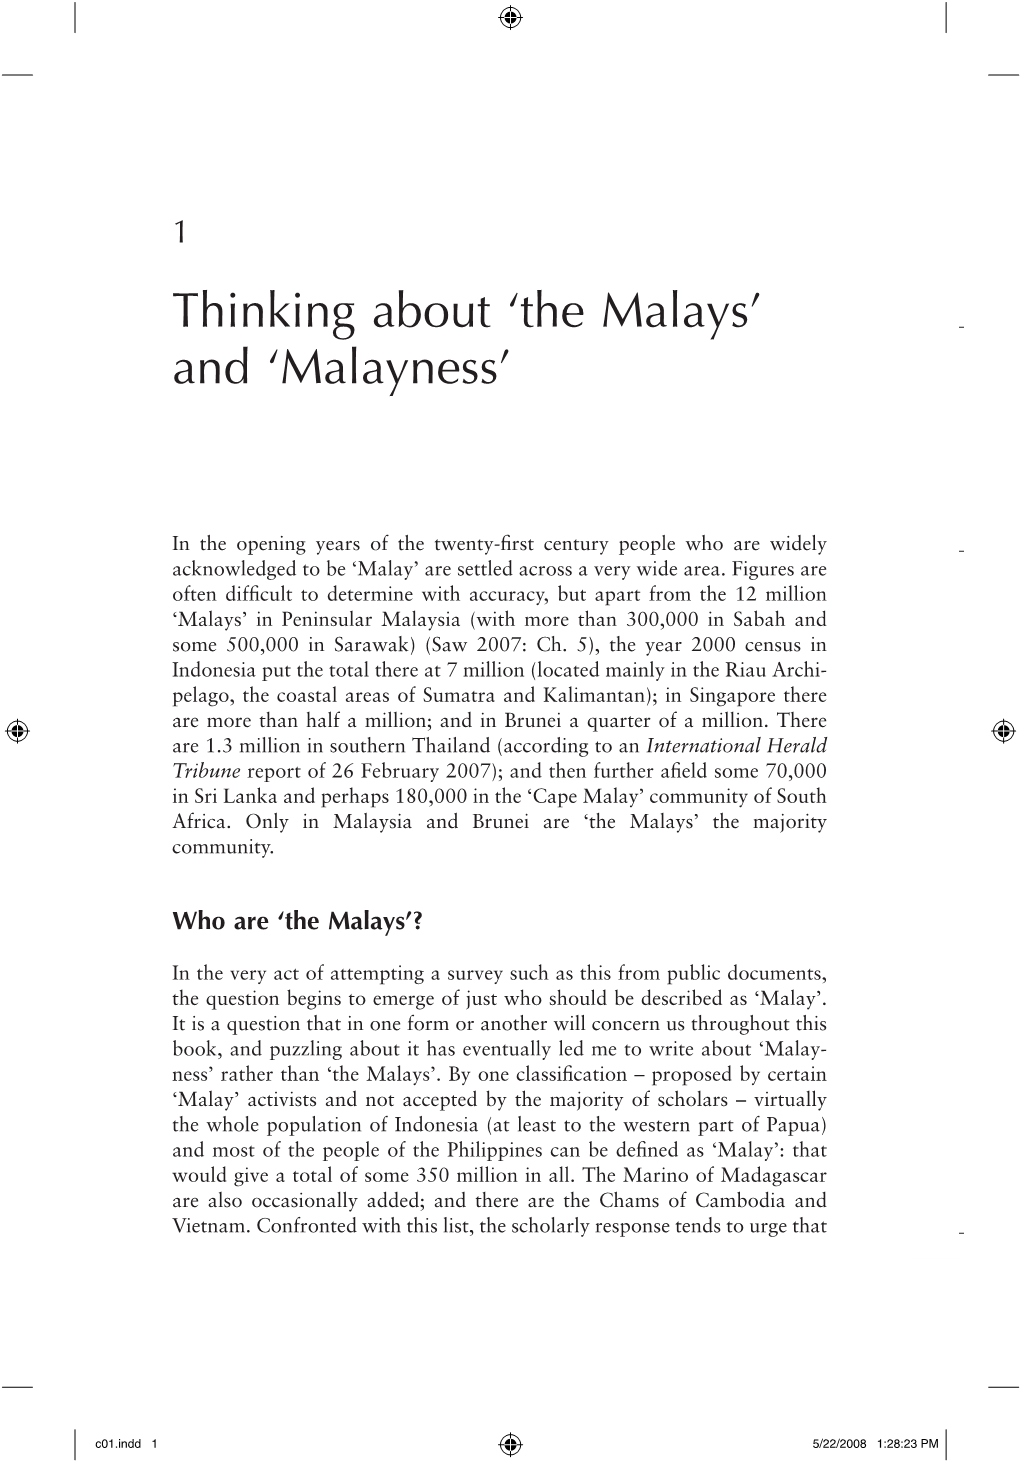 Thinking About 'The Malays' and 'Malayness'